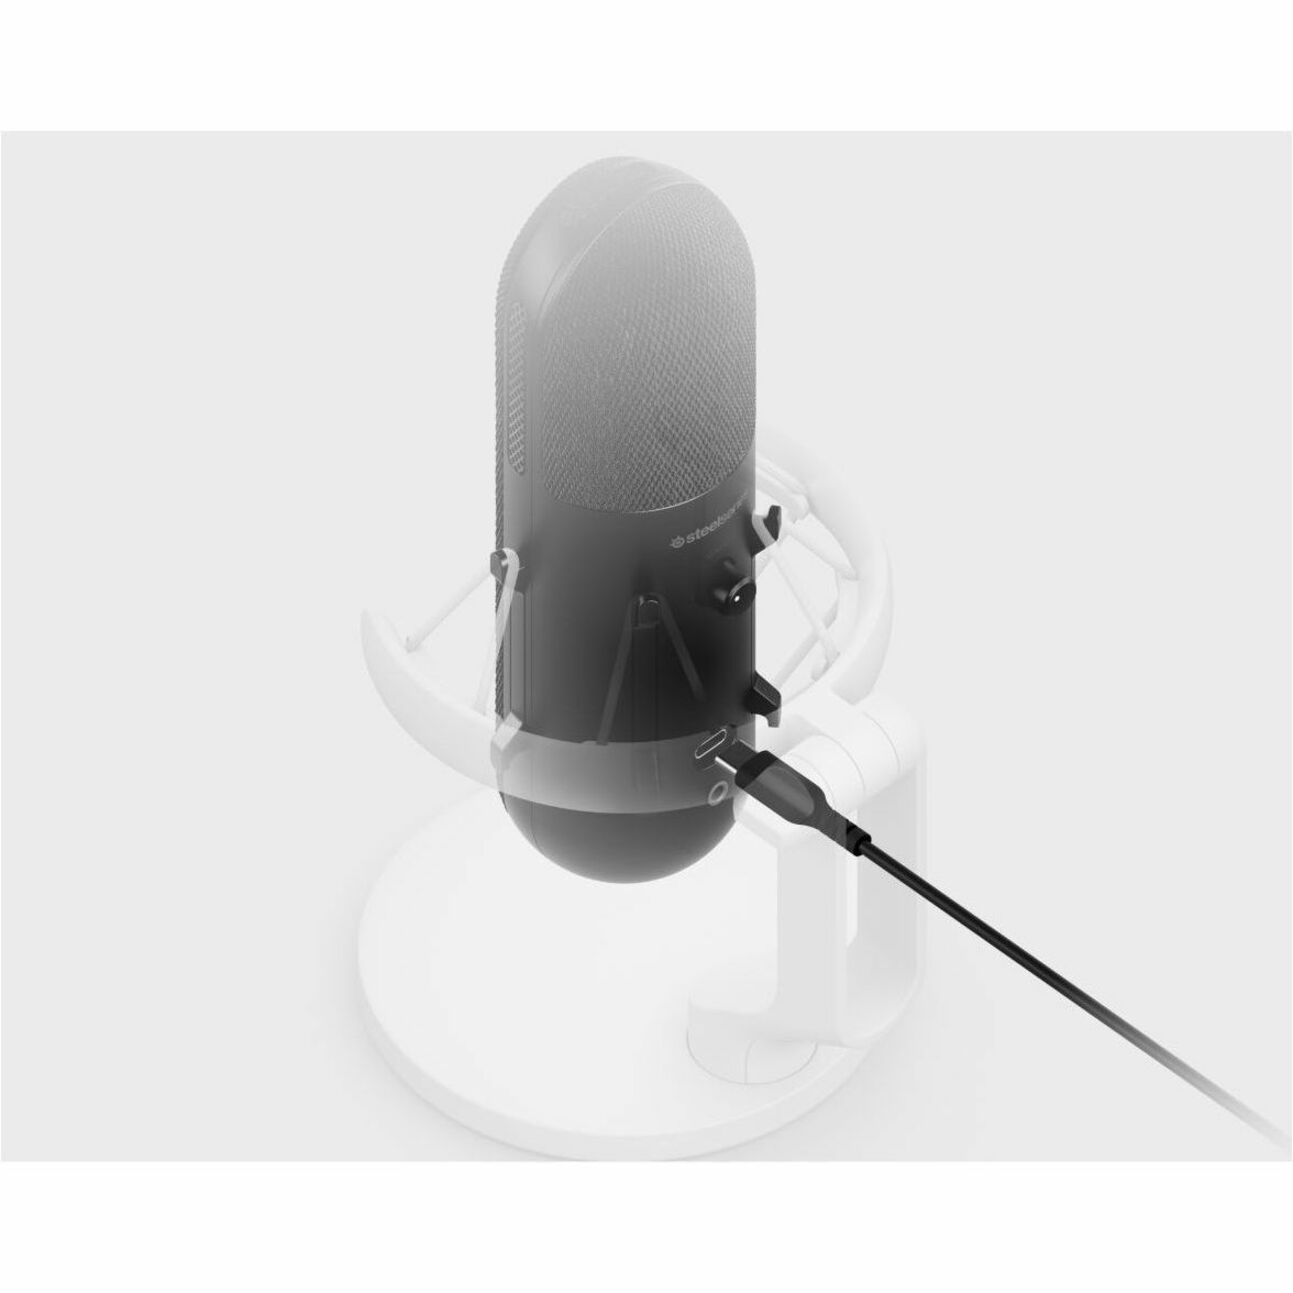 SteelSeries 61601 Alias Microphone, Desktop Stand Mountable, Condenser, Noise Cancelling